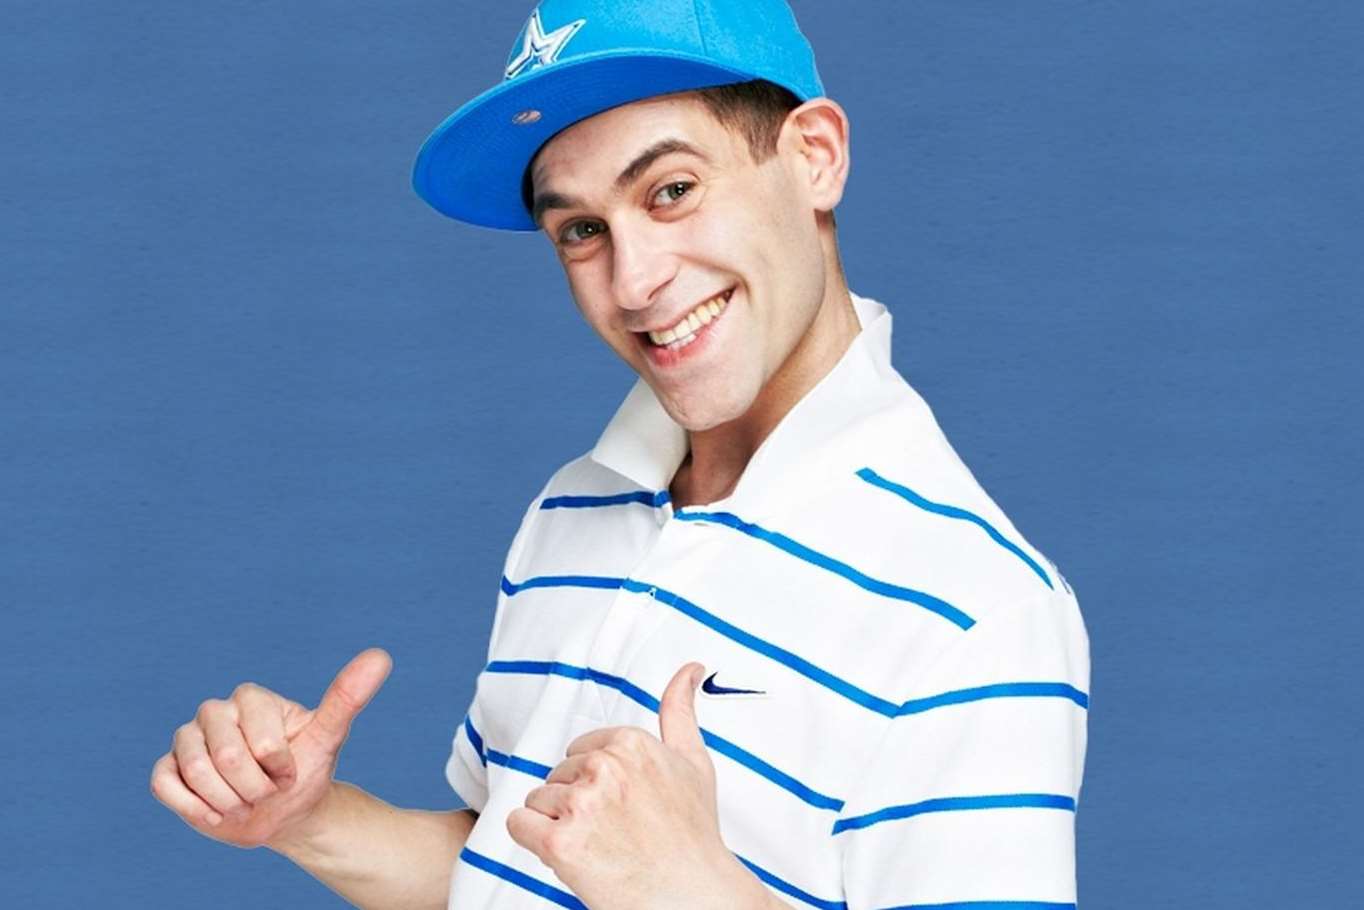 'Cheeky chavvy' Lee Nelson is famous for his 'qualiteee' TV catchphrase